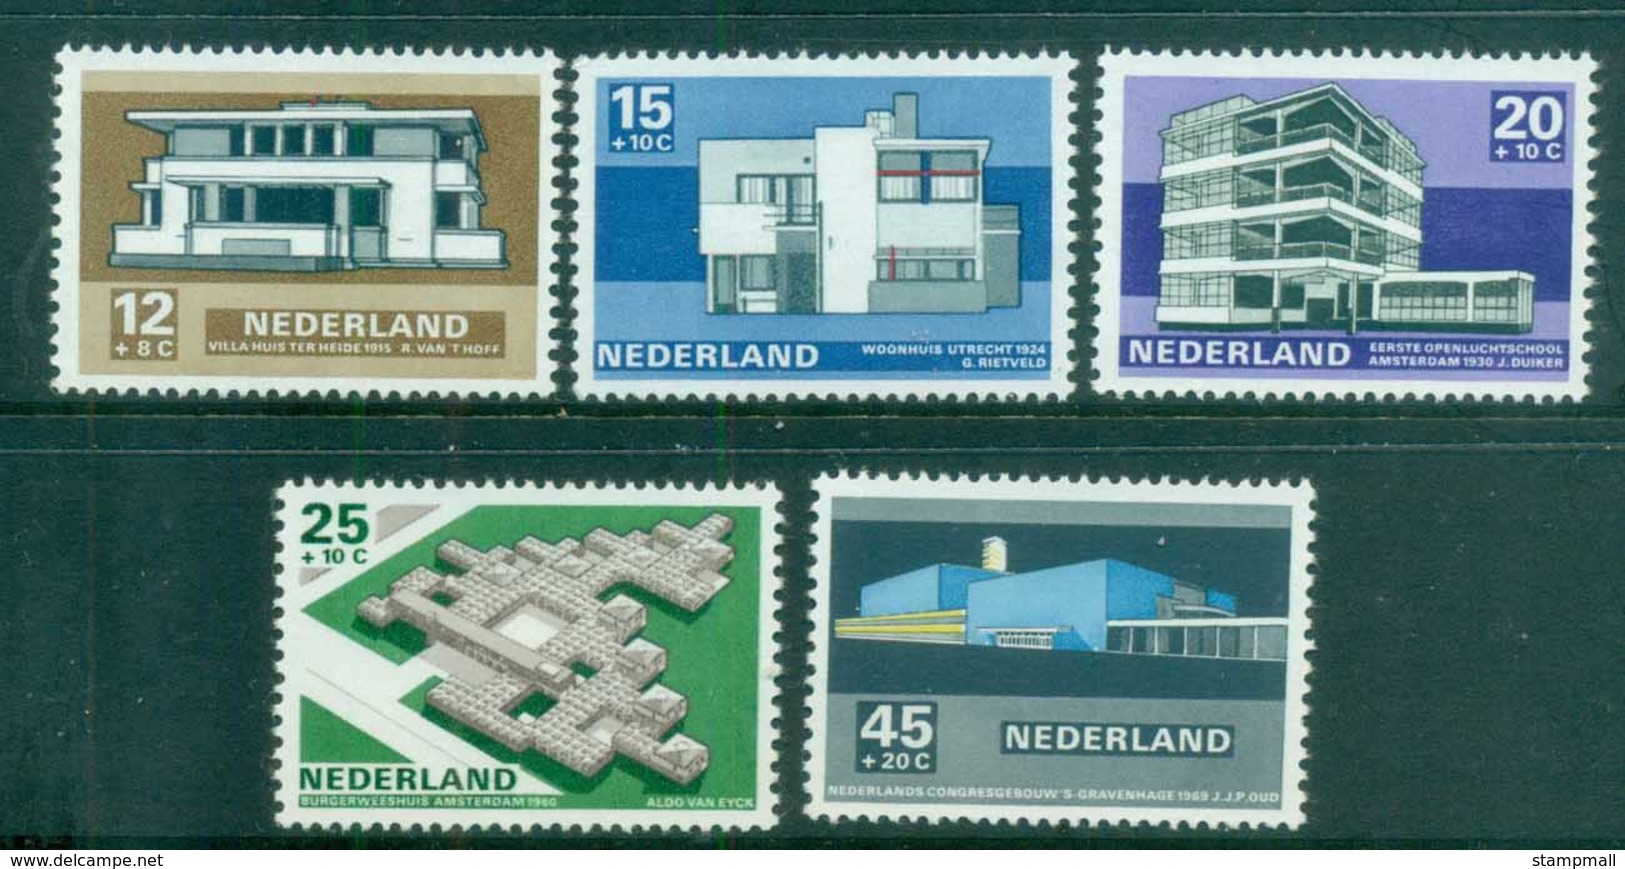 Netherlands 1969 Charity, Social & Cultural Purposes, Architecture MUH Lot76553 - Unclassified